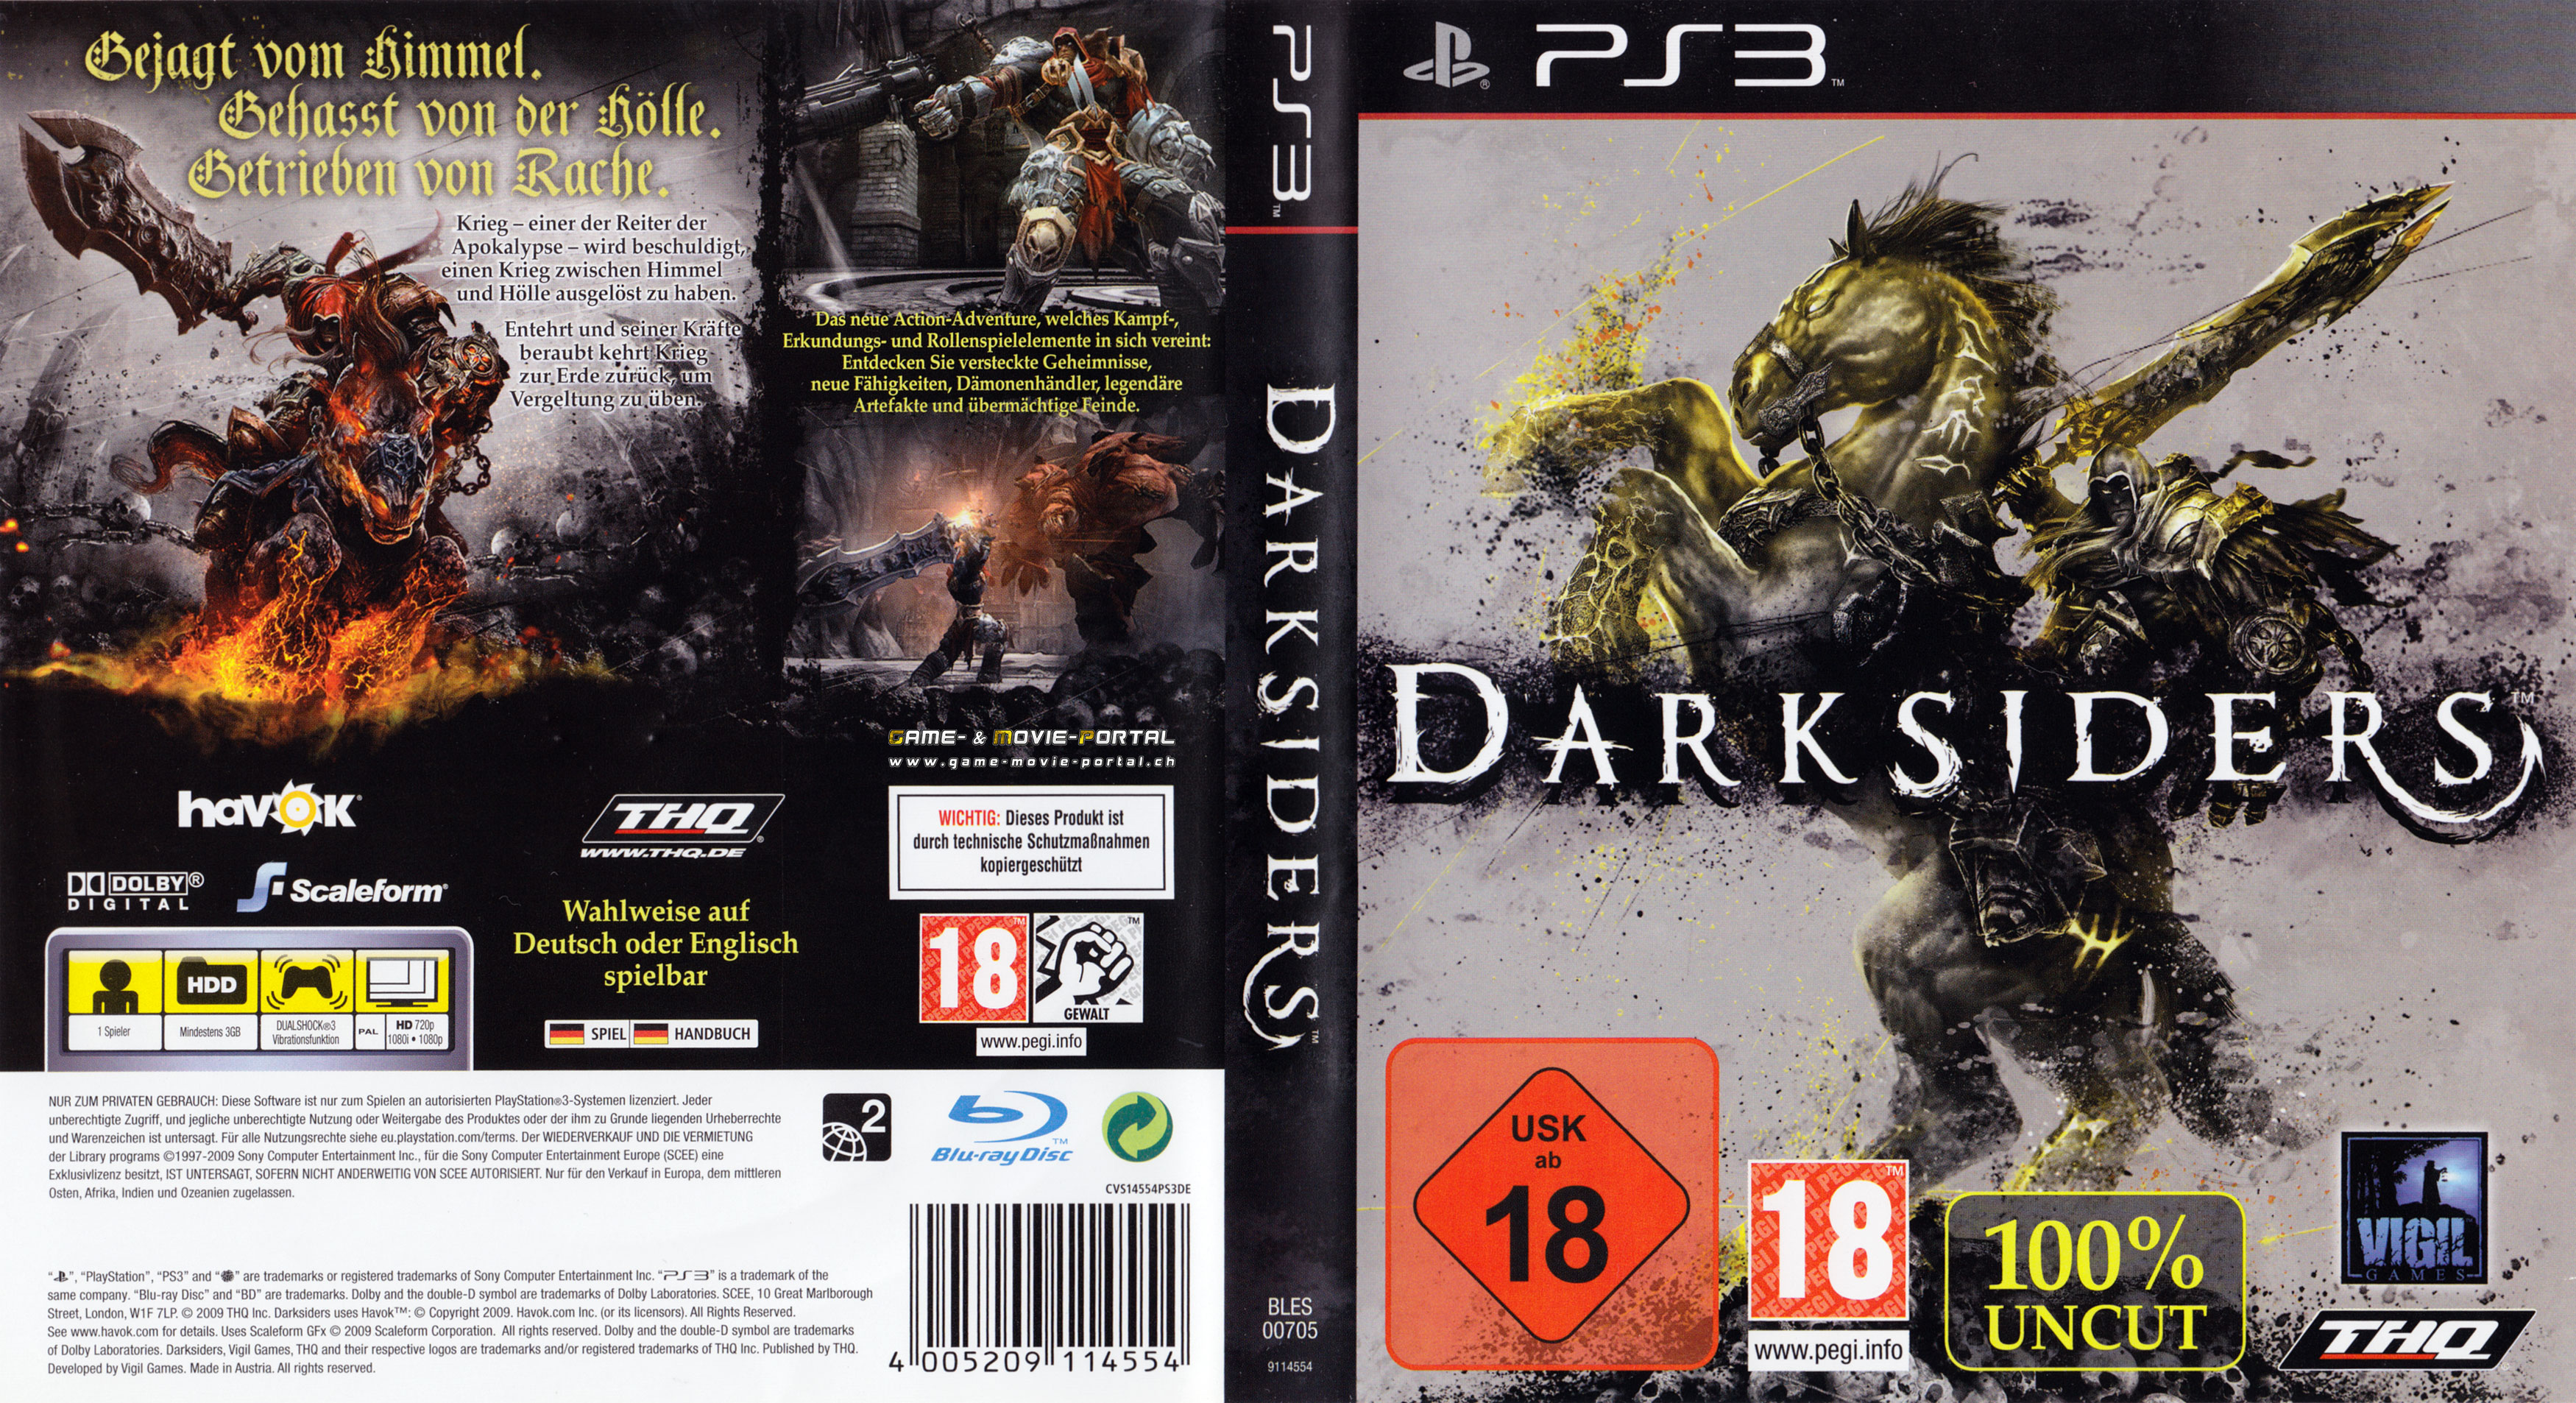 Darksiders Playstation 3 Covers Cover Century Over 500 000 Album Art Covers For Free